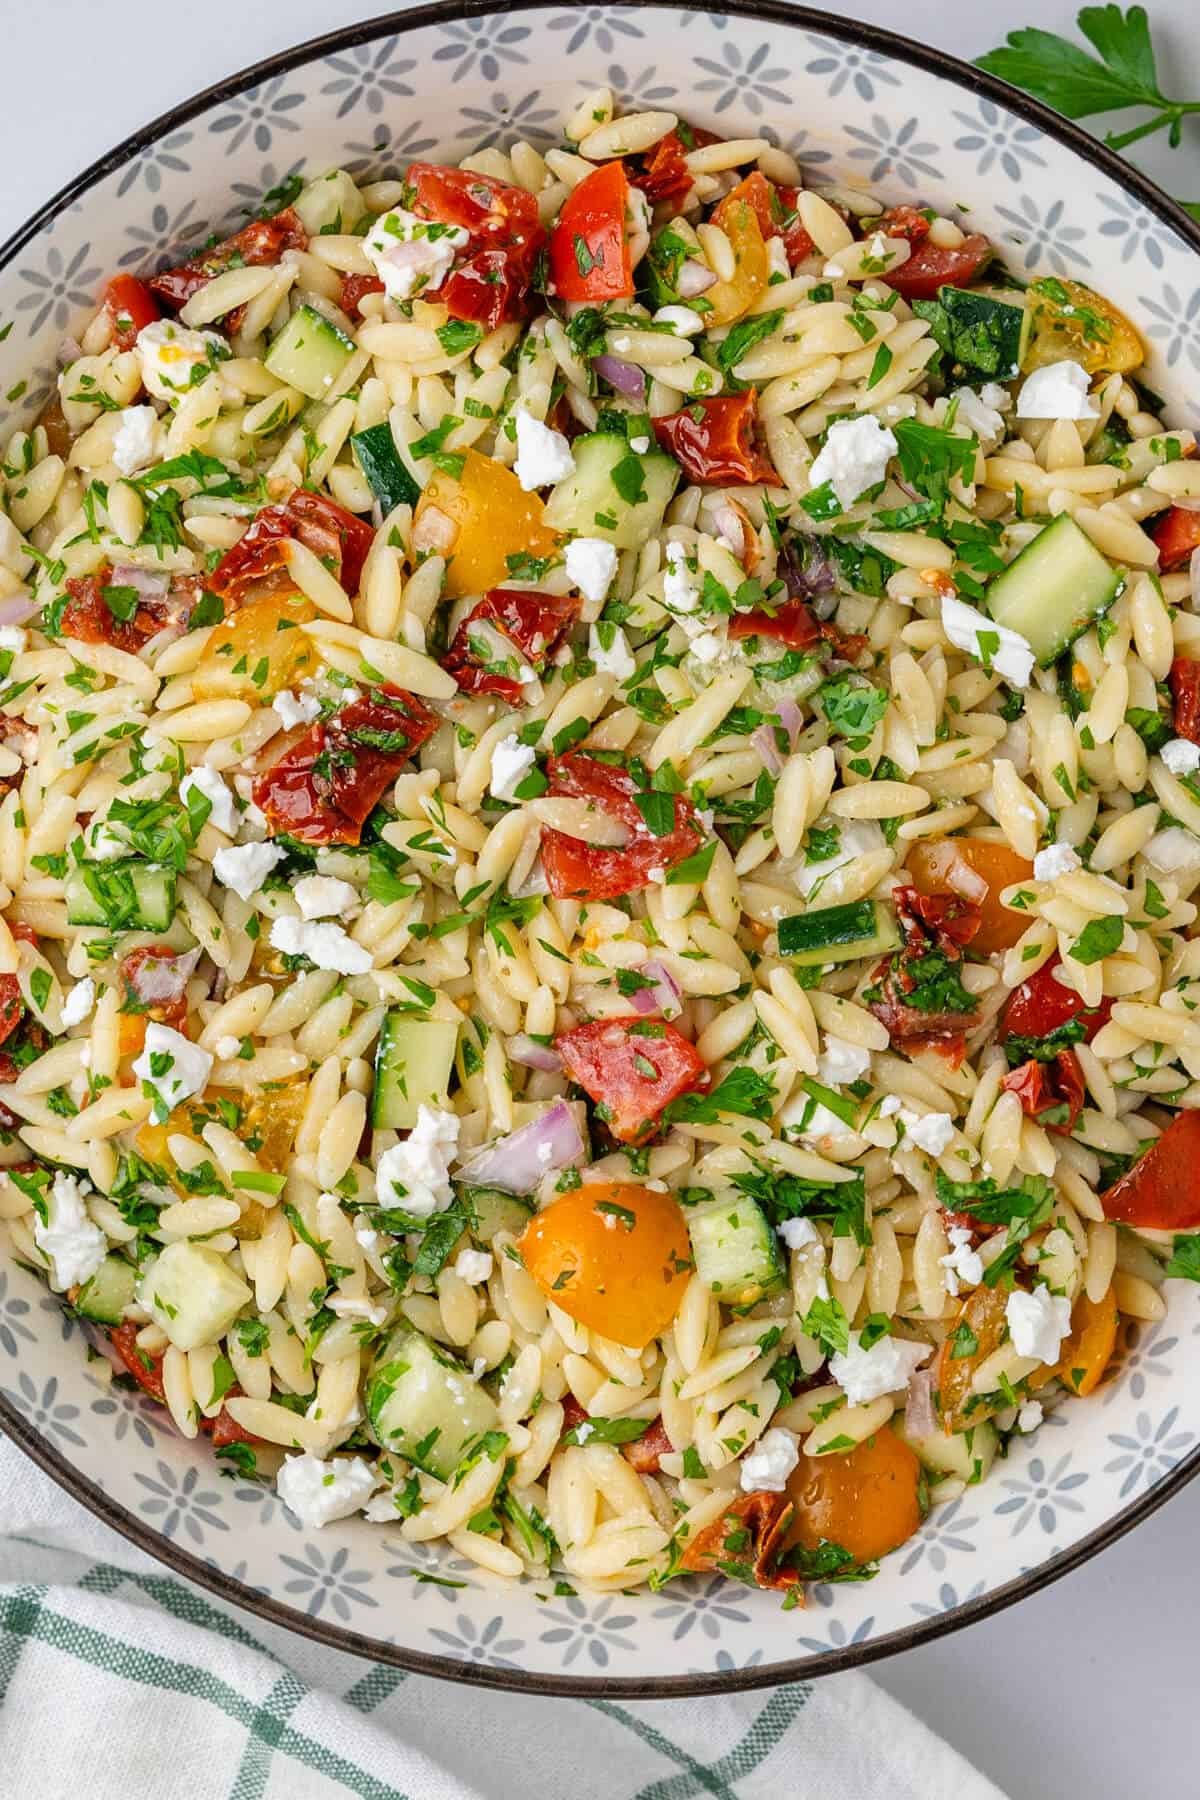 Orzo salad served in large bowl